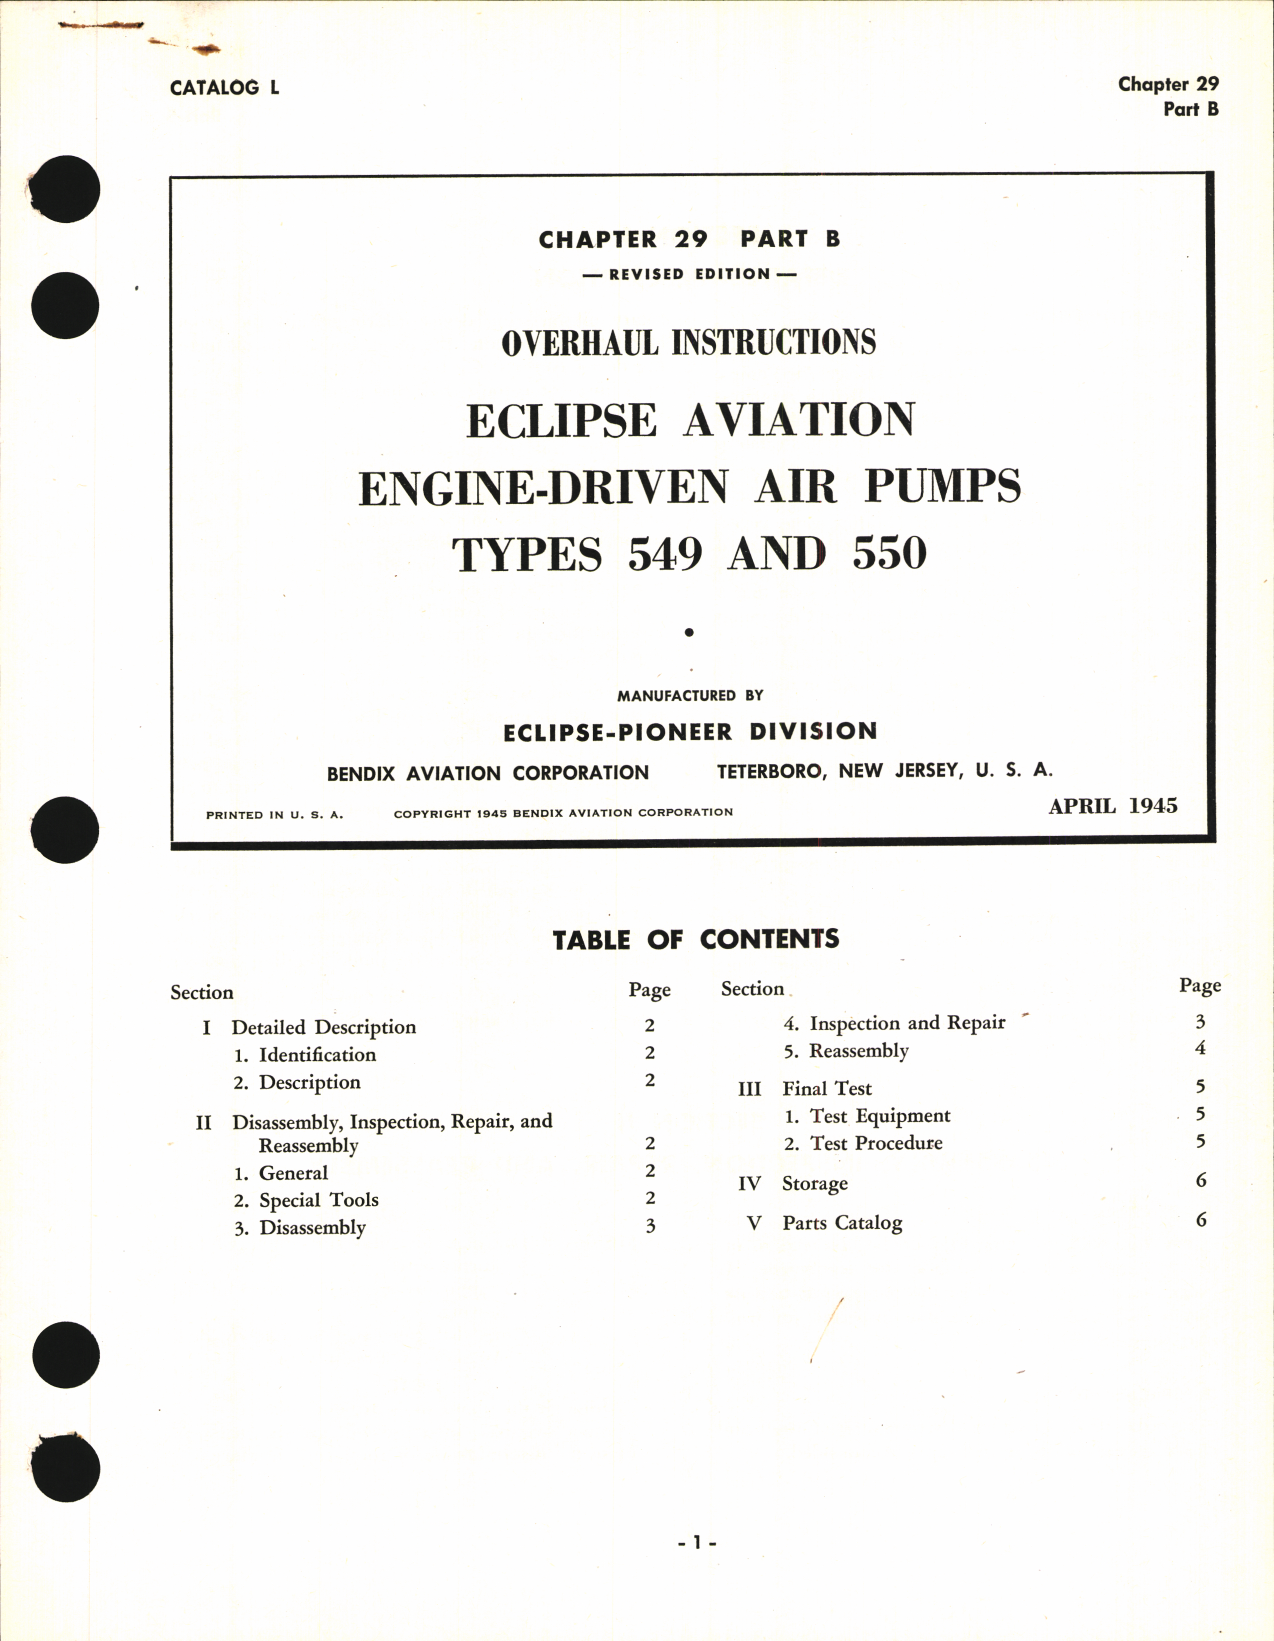 Sample page 1 from AirCorps Library document: Overhaul Instructions for Eclipse Aviation Engine-Driven Air Pumps Types 549 and 550